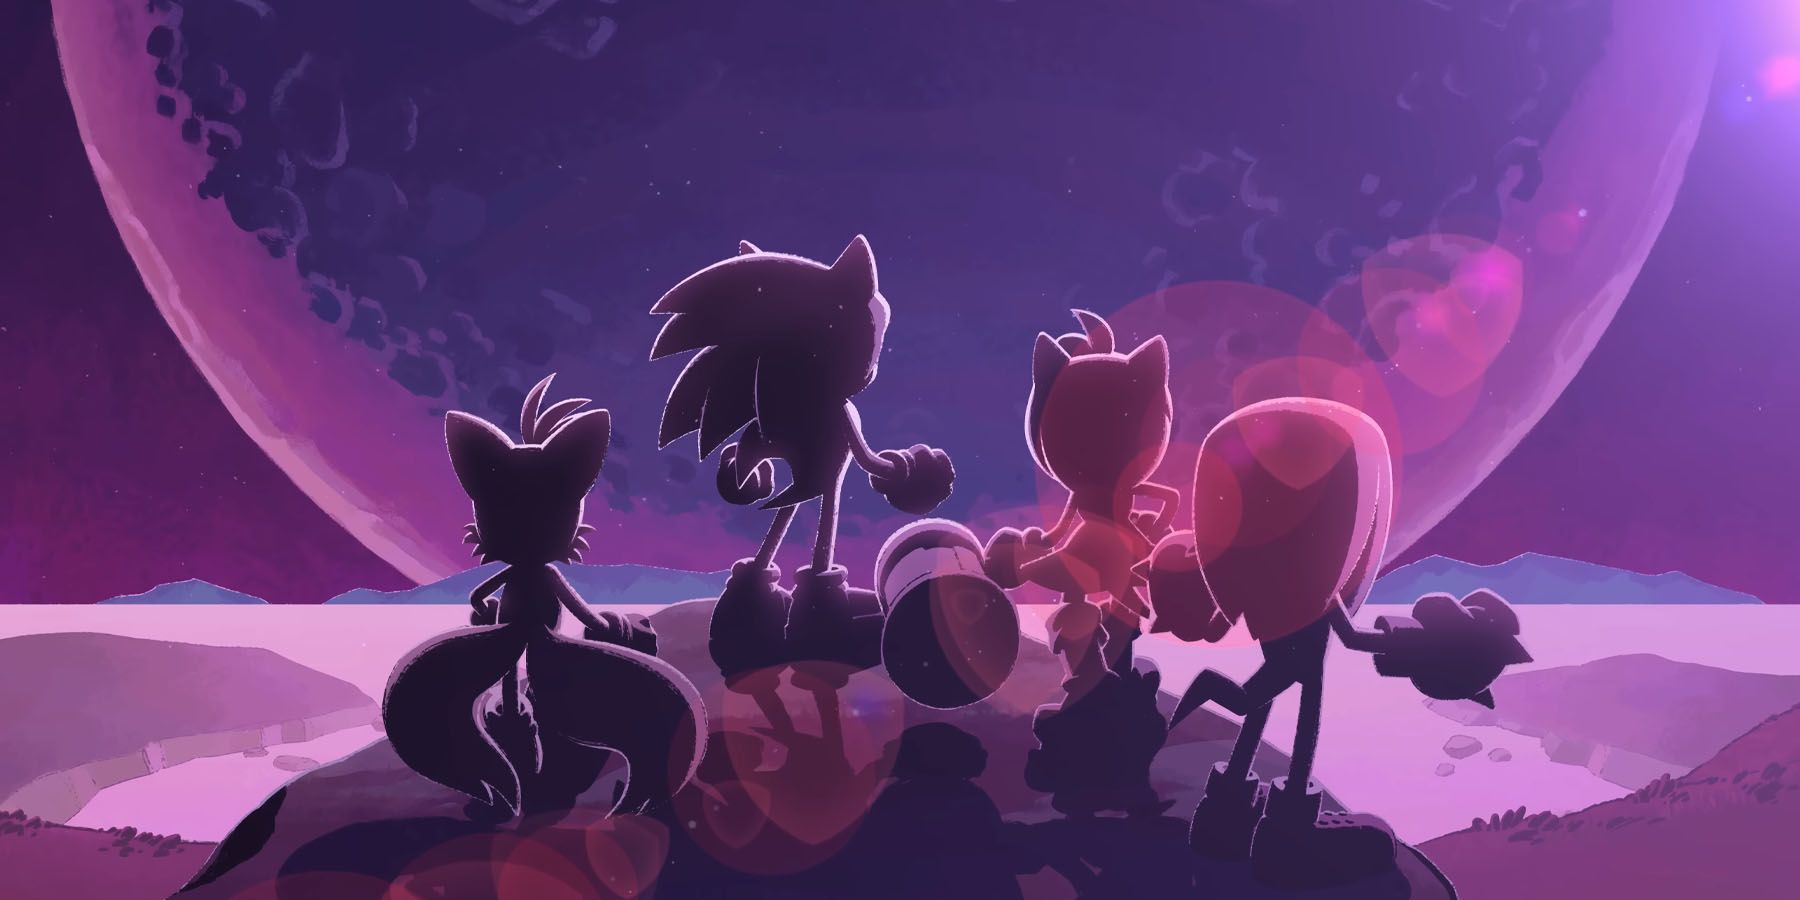 The free story DLC called The Final Horizon for Sonic Frontiers is